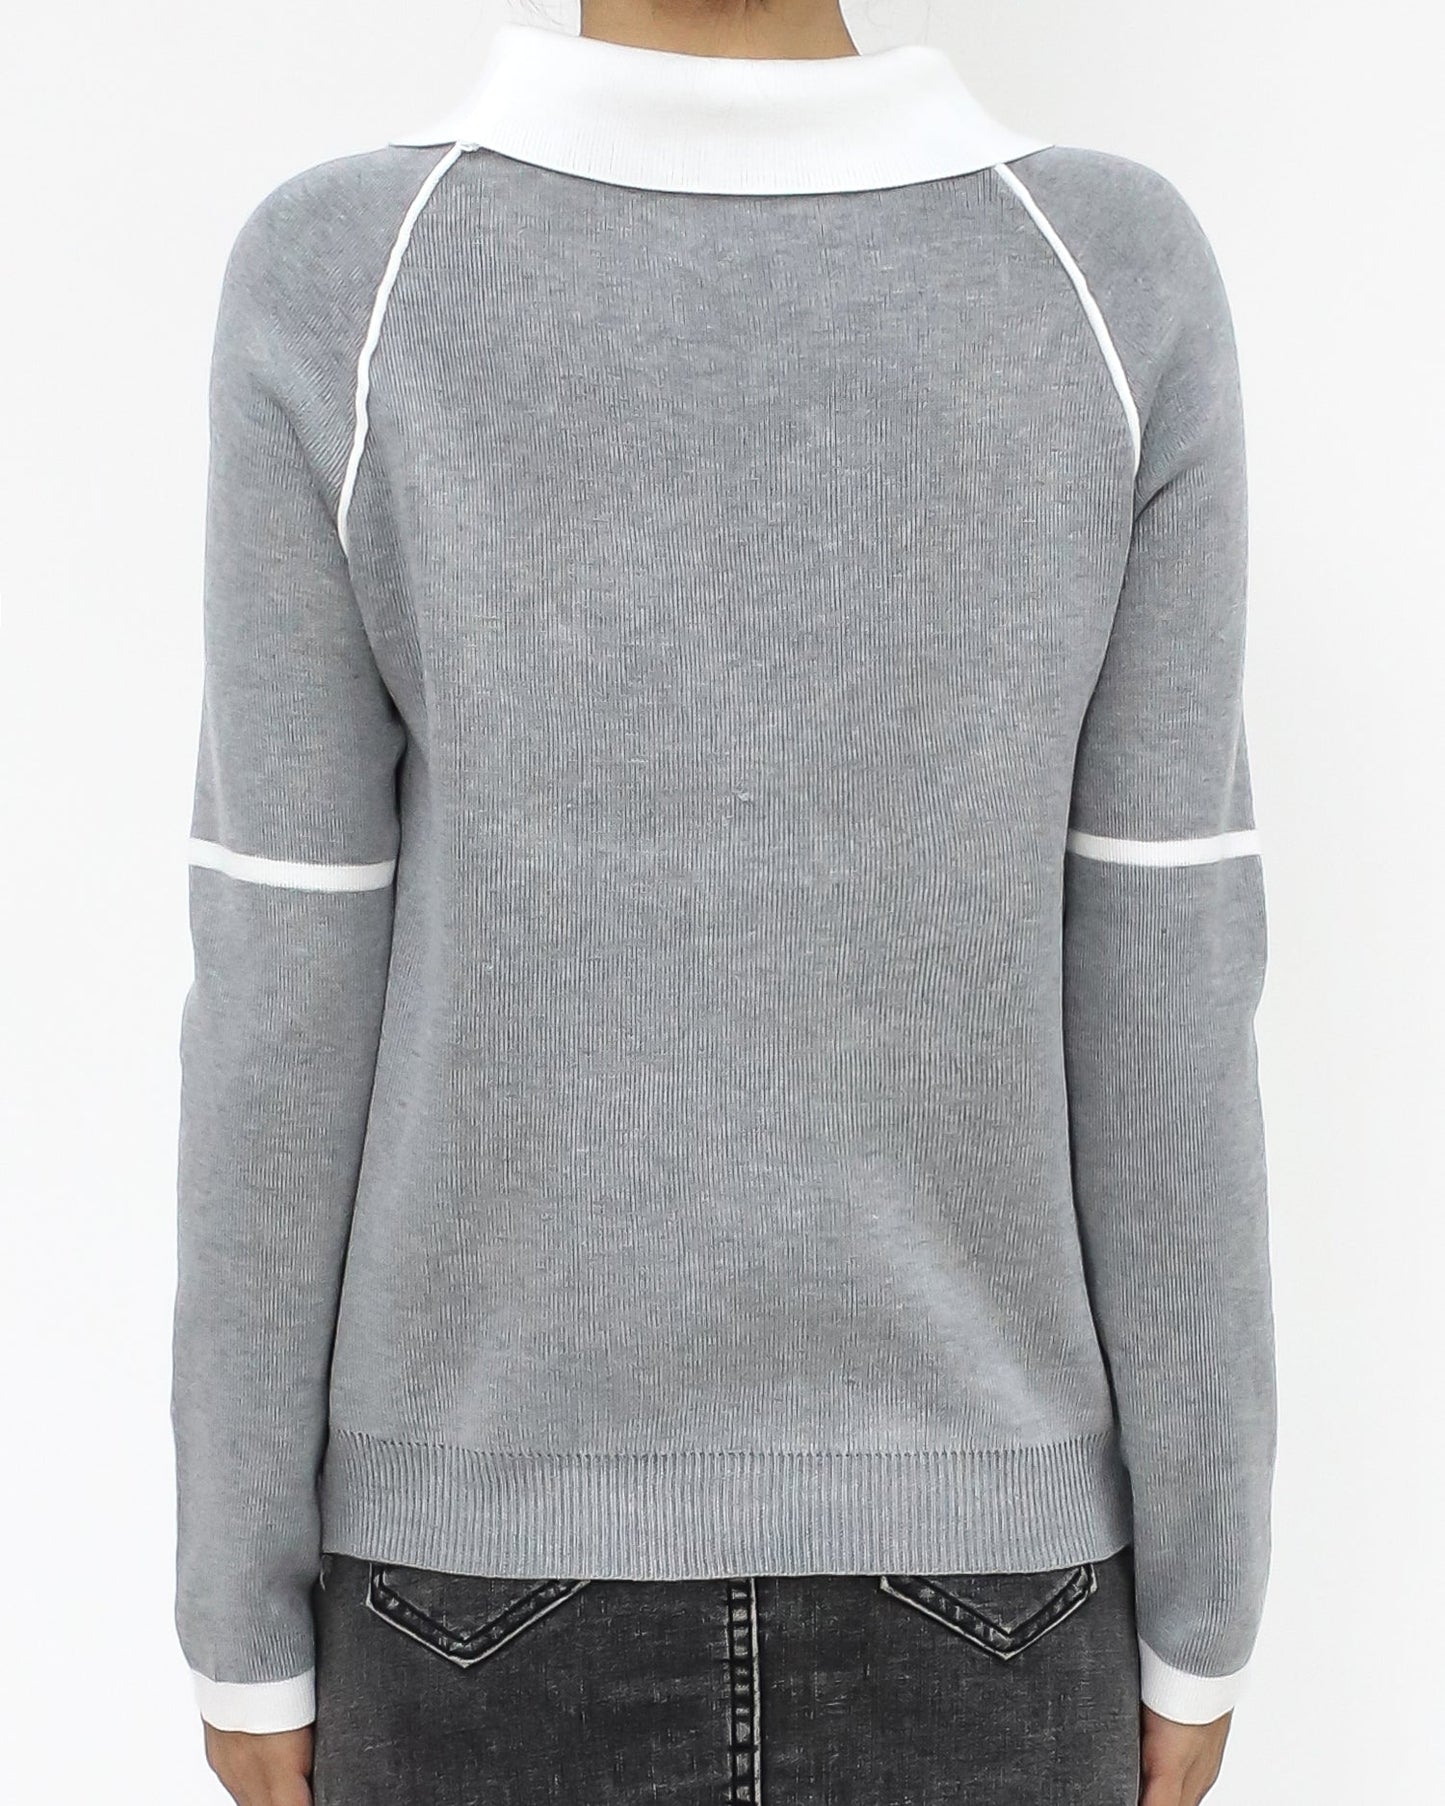 grey & ivory collar knitted top *pre-order*